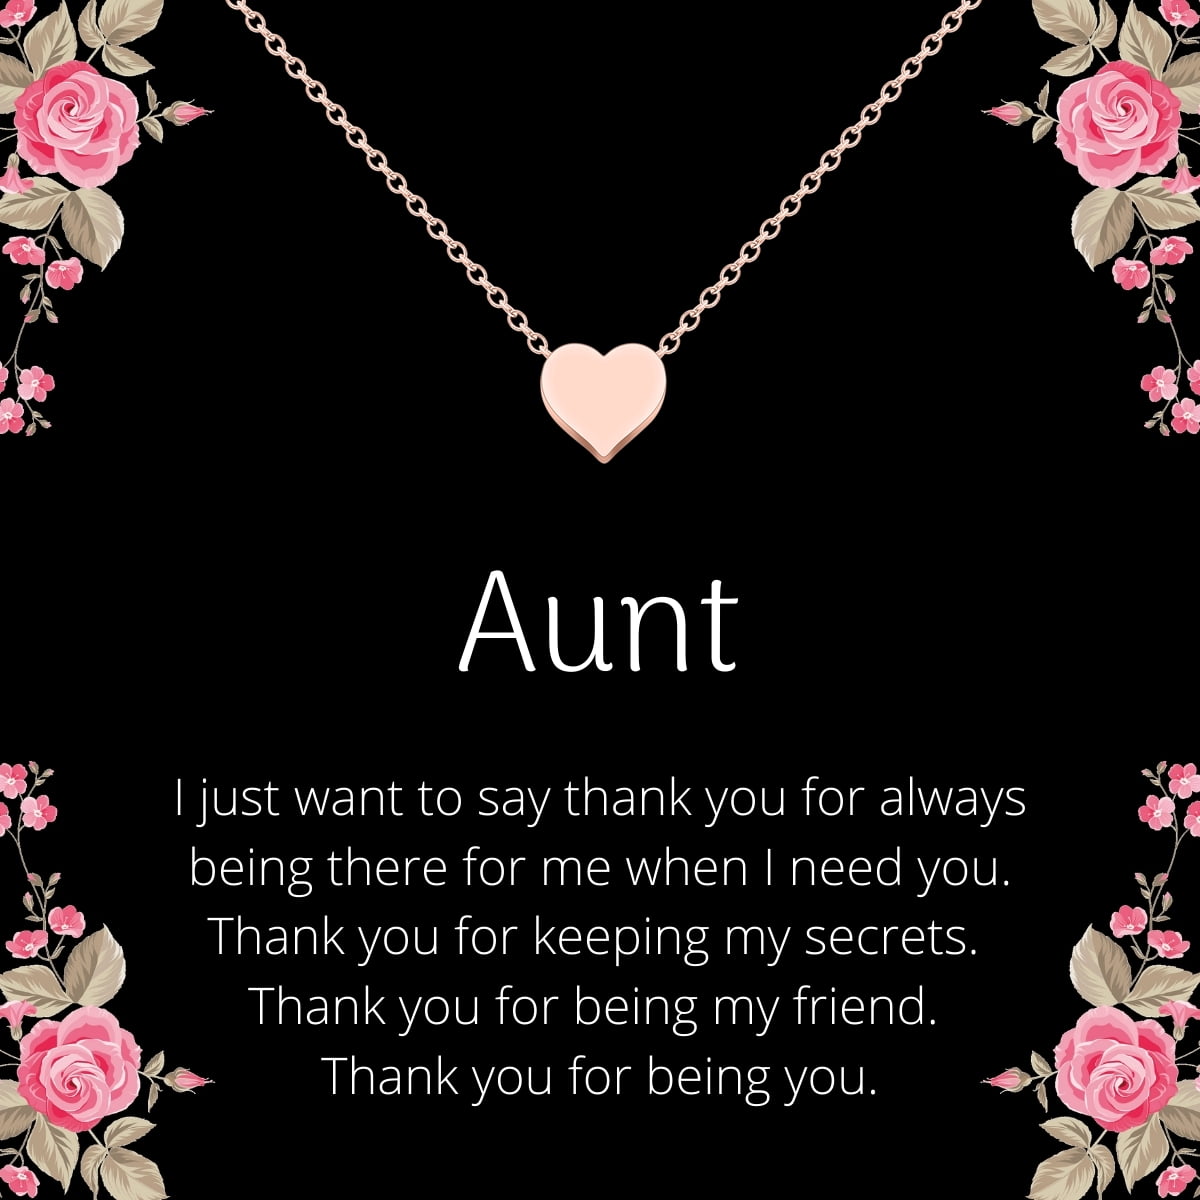 The Love of My Life Strong Caring Thoughtful A Great Provider an Awesome Mother My Lover and Best Friend Pendant Necklace FamilyGift Necklace with Name Wife Anissa 